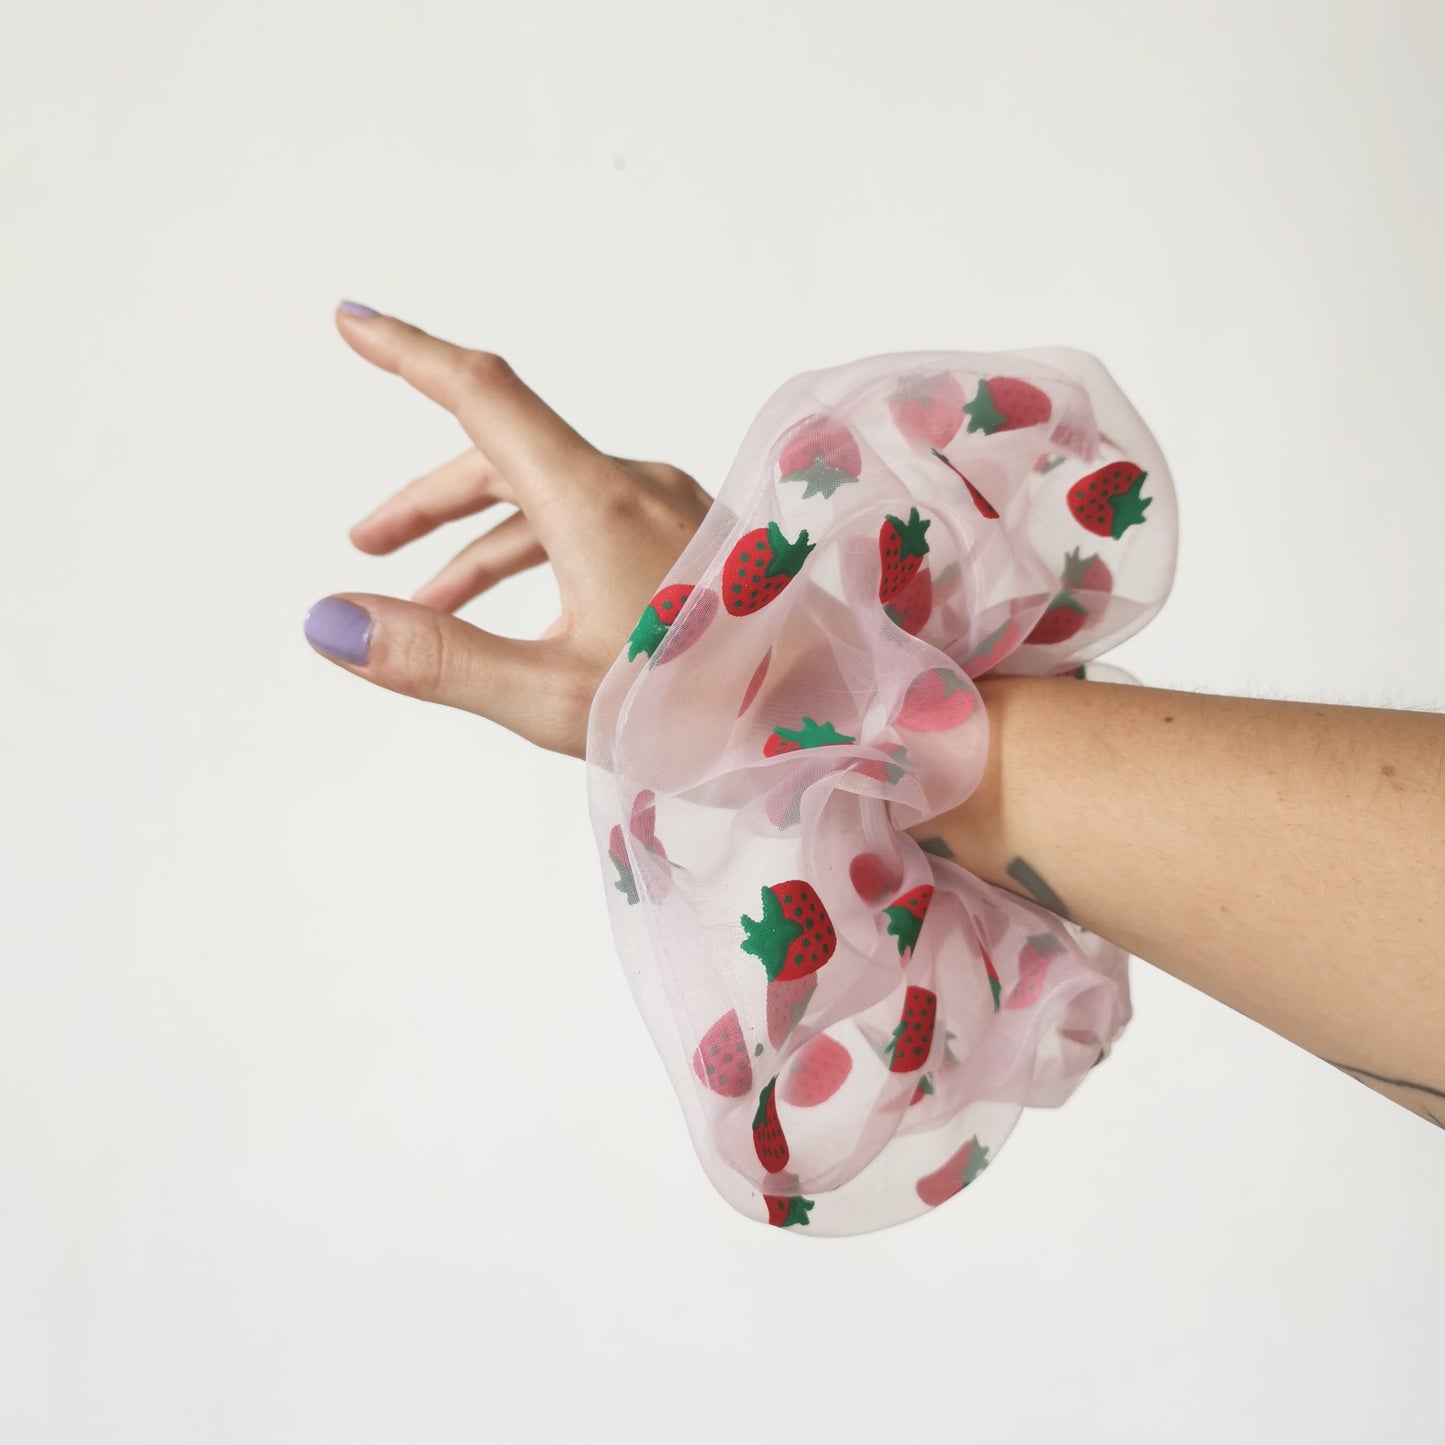 Scrunchie Subscription - 3, 6 or 12 months